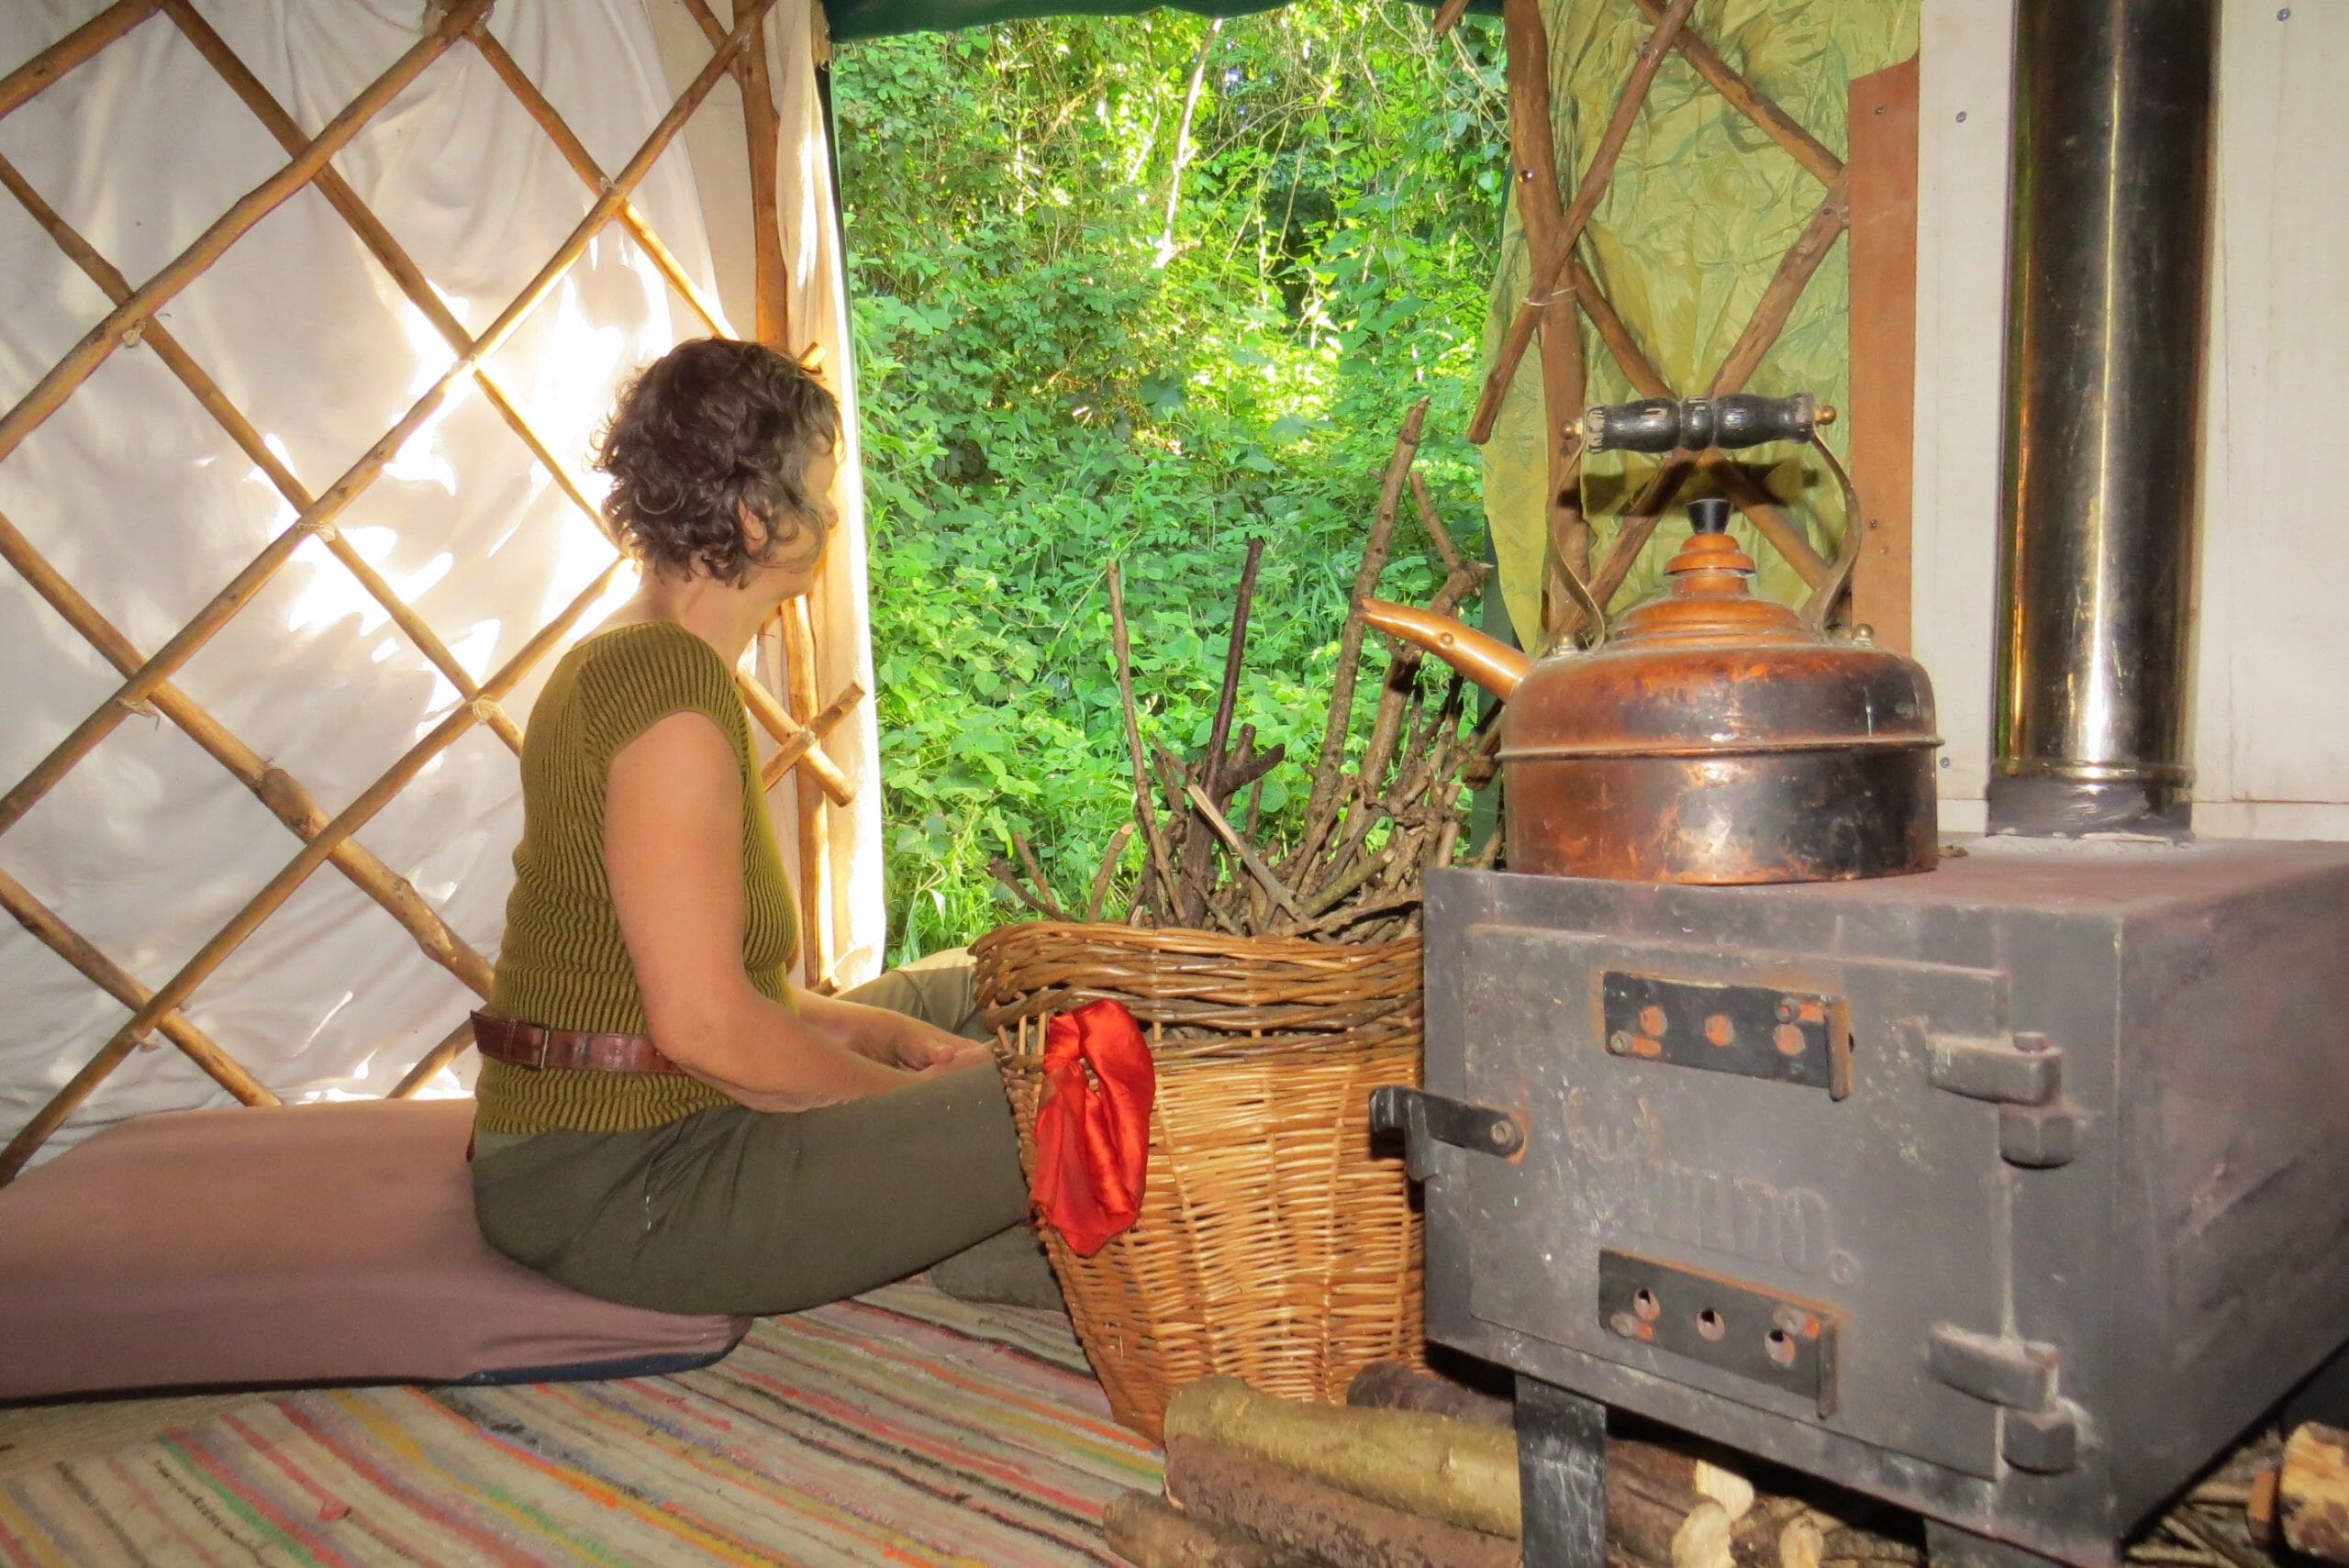 A woman inside the yurt looking out to the woods